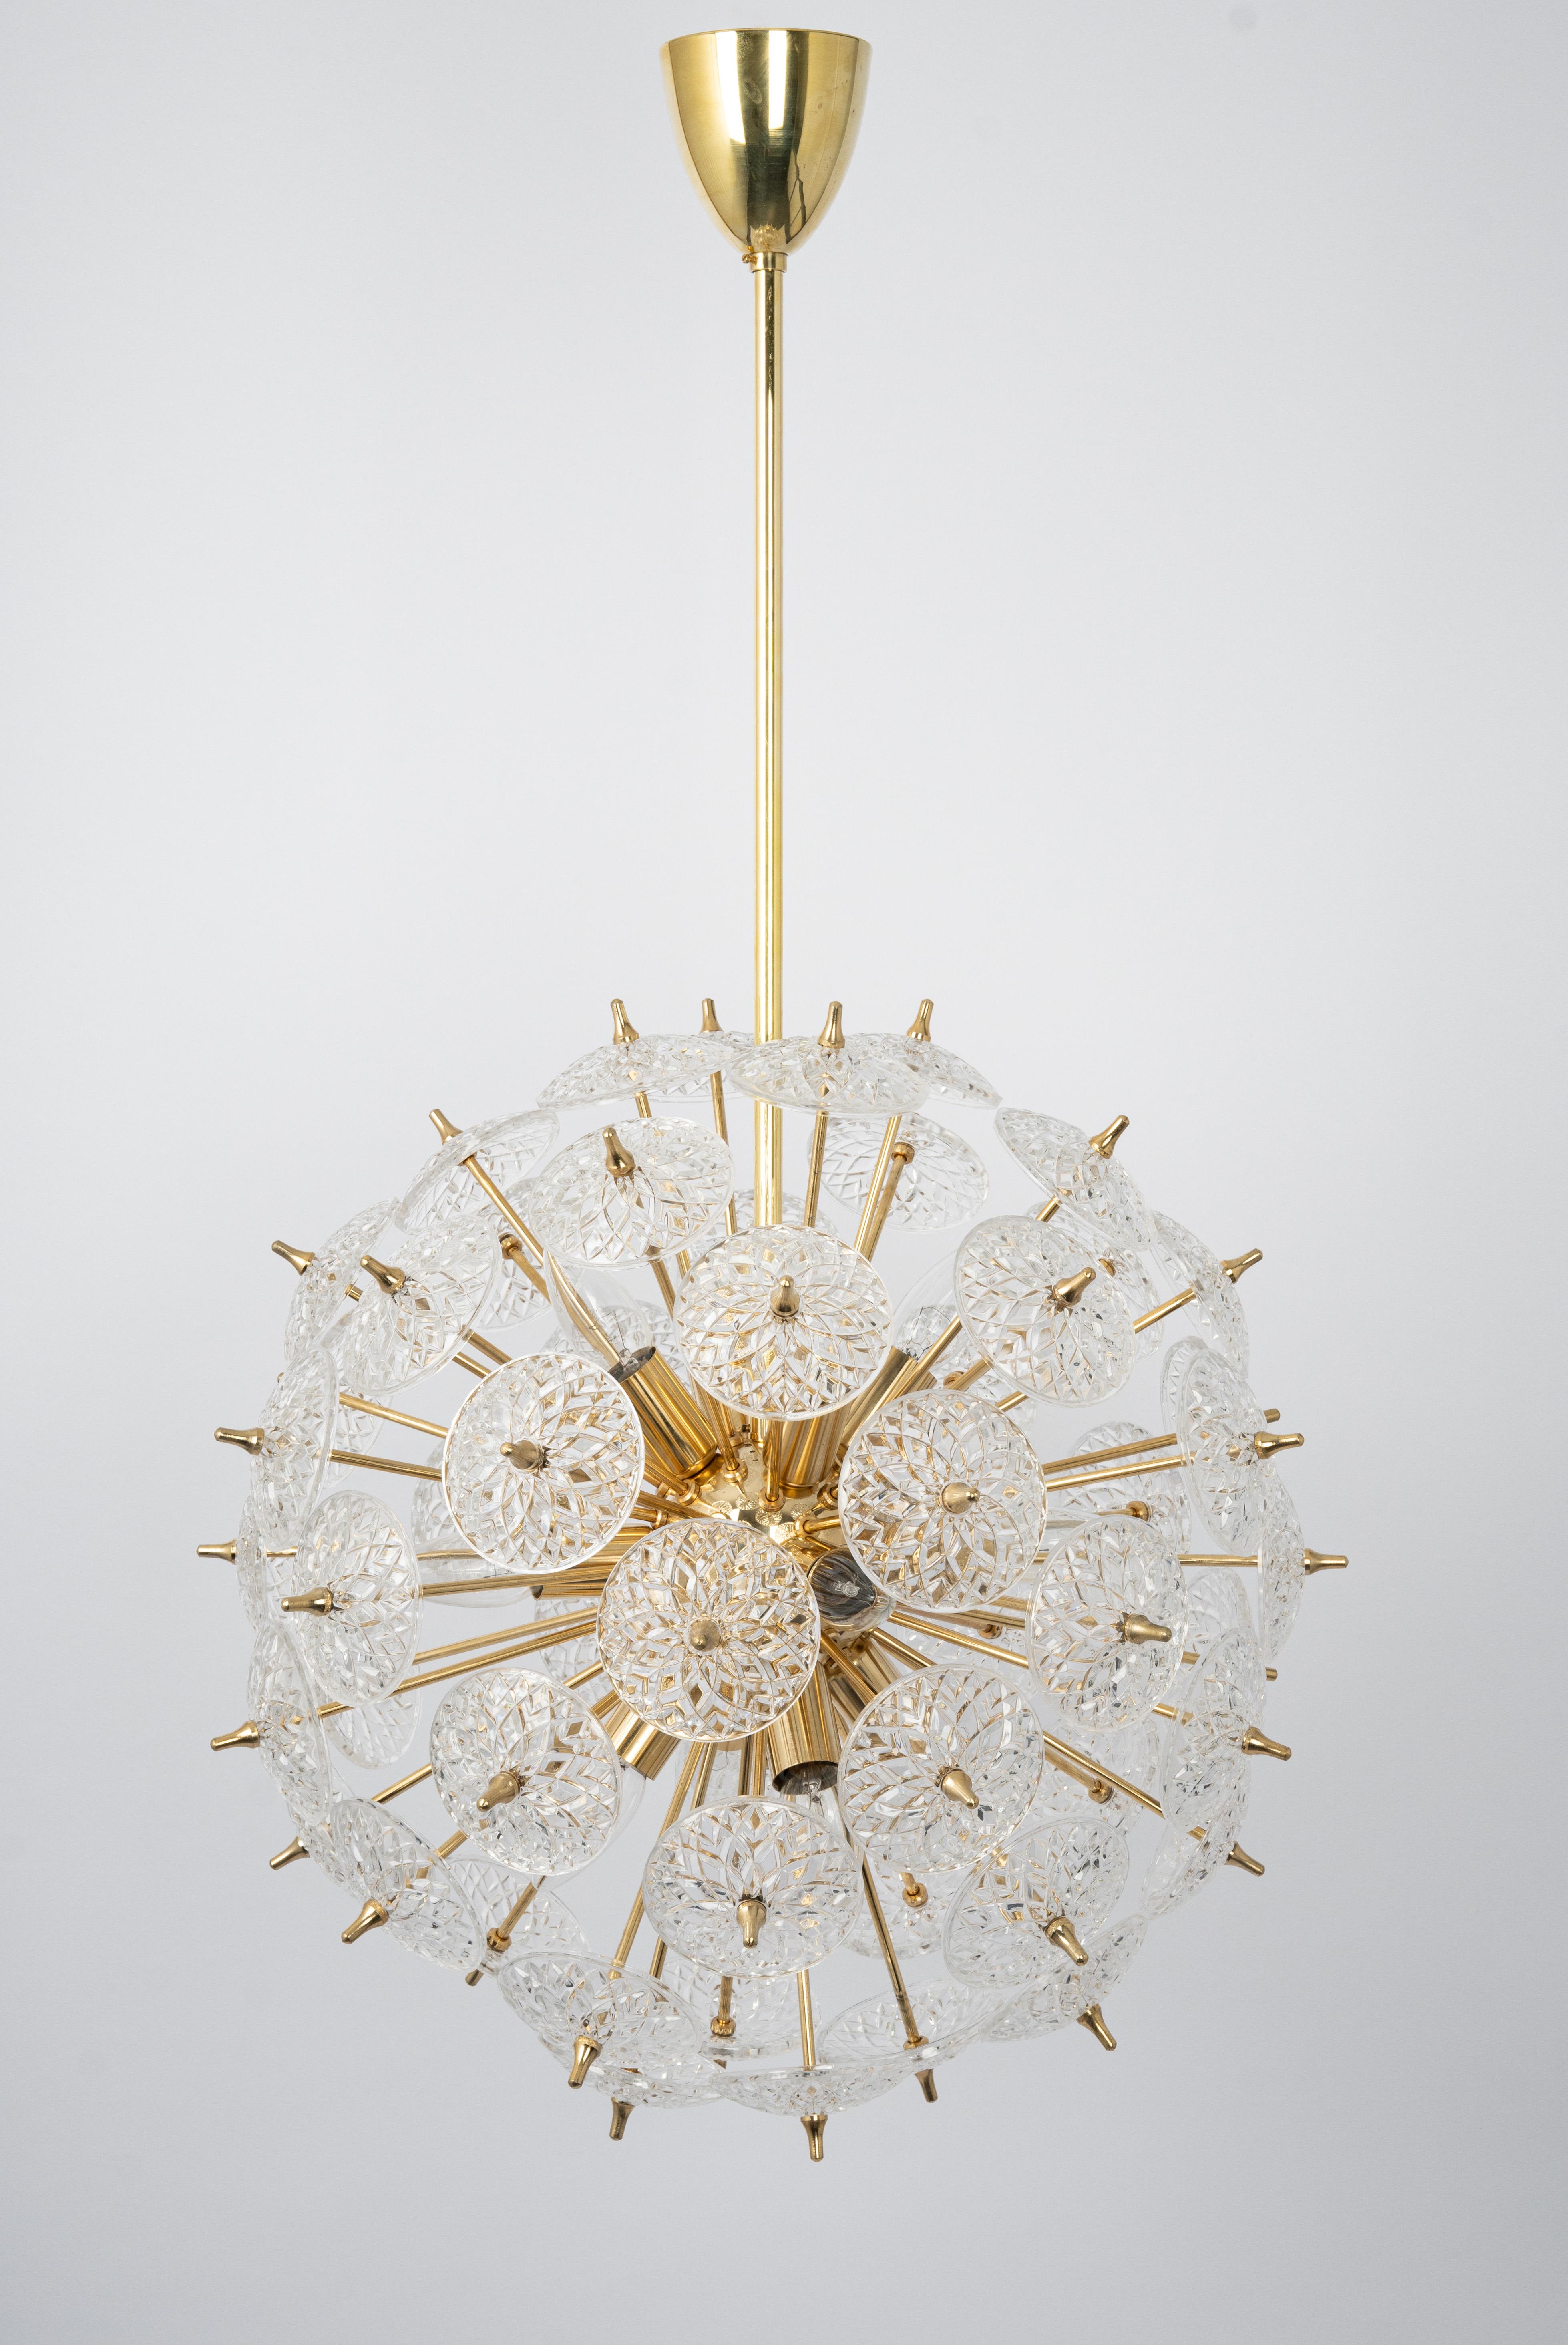 Stunning floral glass and brass Sputnik chandelier, Germany, 1970s.

Each Pendant light requires 12 x E14 small bulbs with 40W max each.
Light bulbs are not included. It is possible to install this fixture in all countries (US, UK, Europe, Asia,